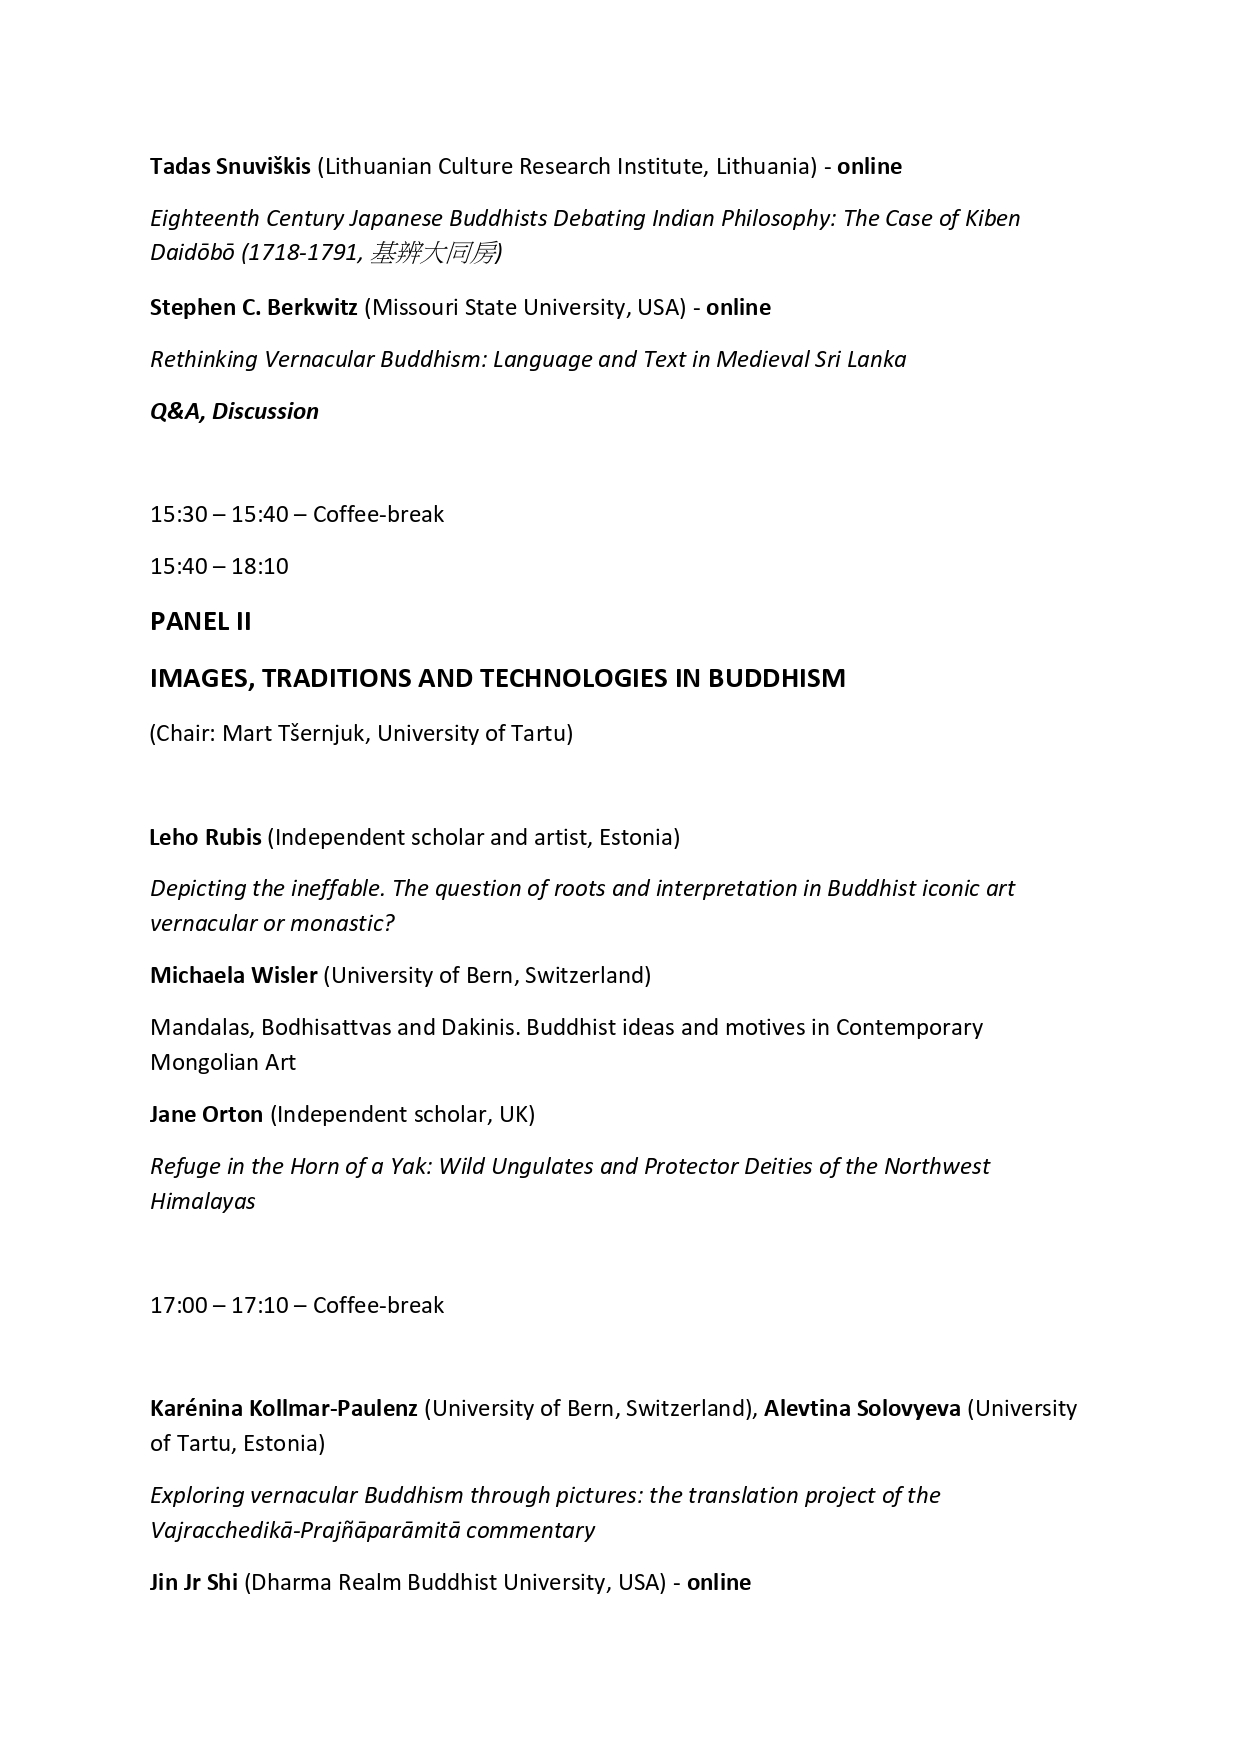 Conference program (2) (1)_page-0004